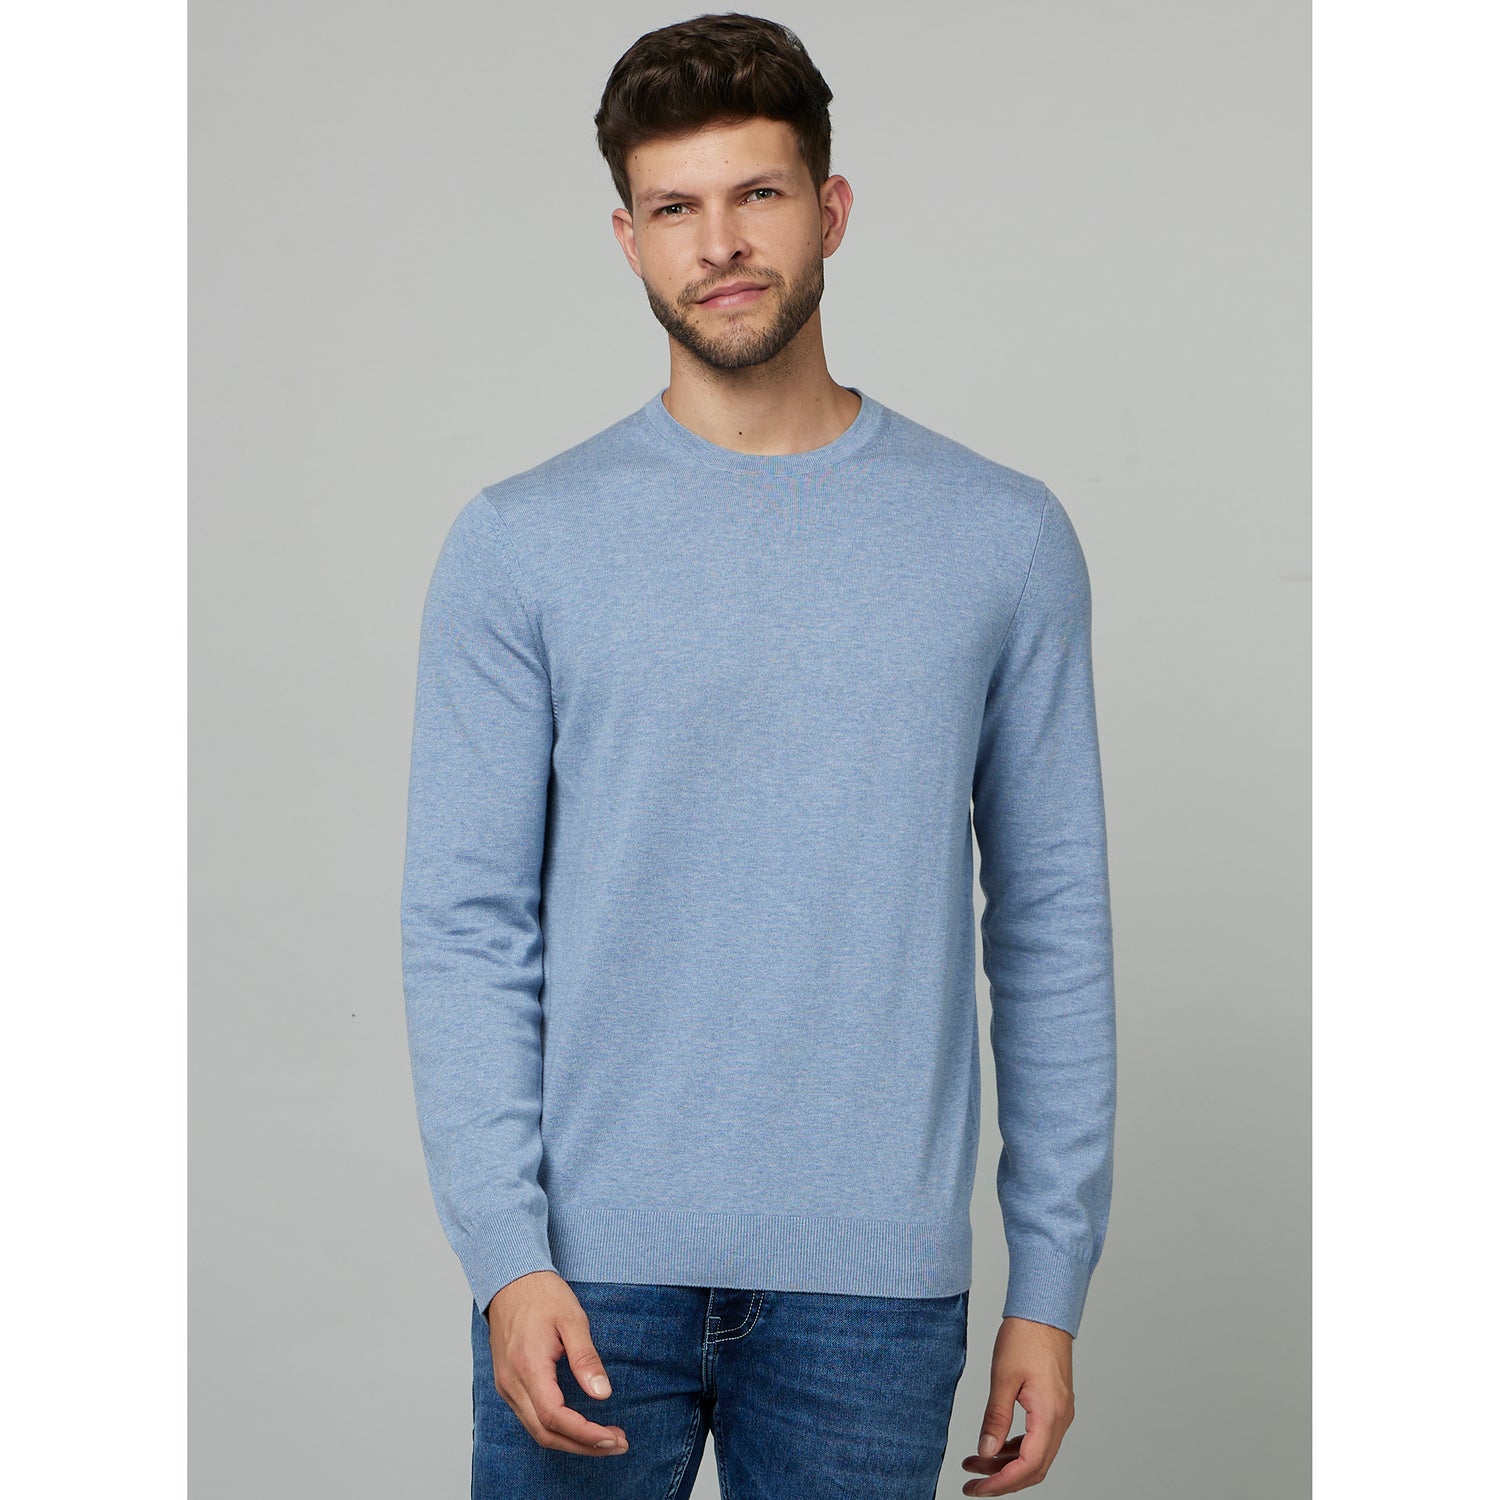 Blue Solid Long Sleeve Cotton Pullover Sweater (DECOTONIN)